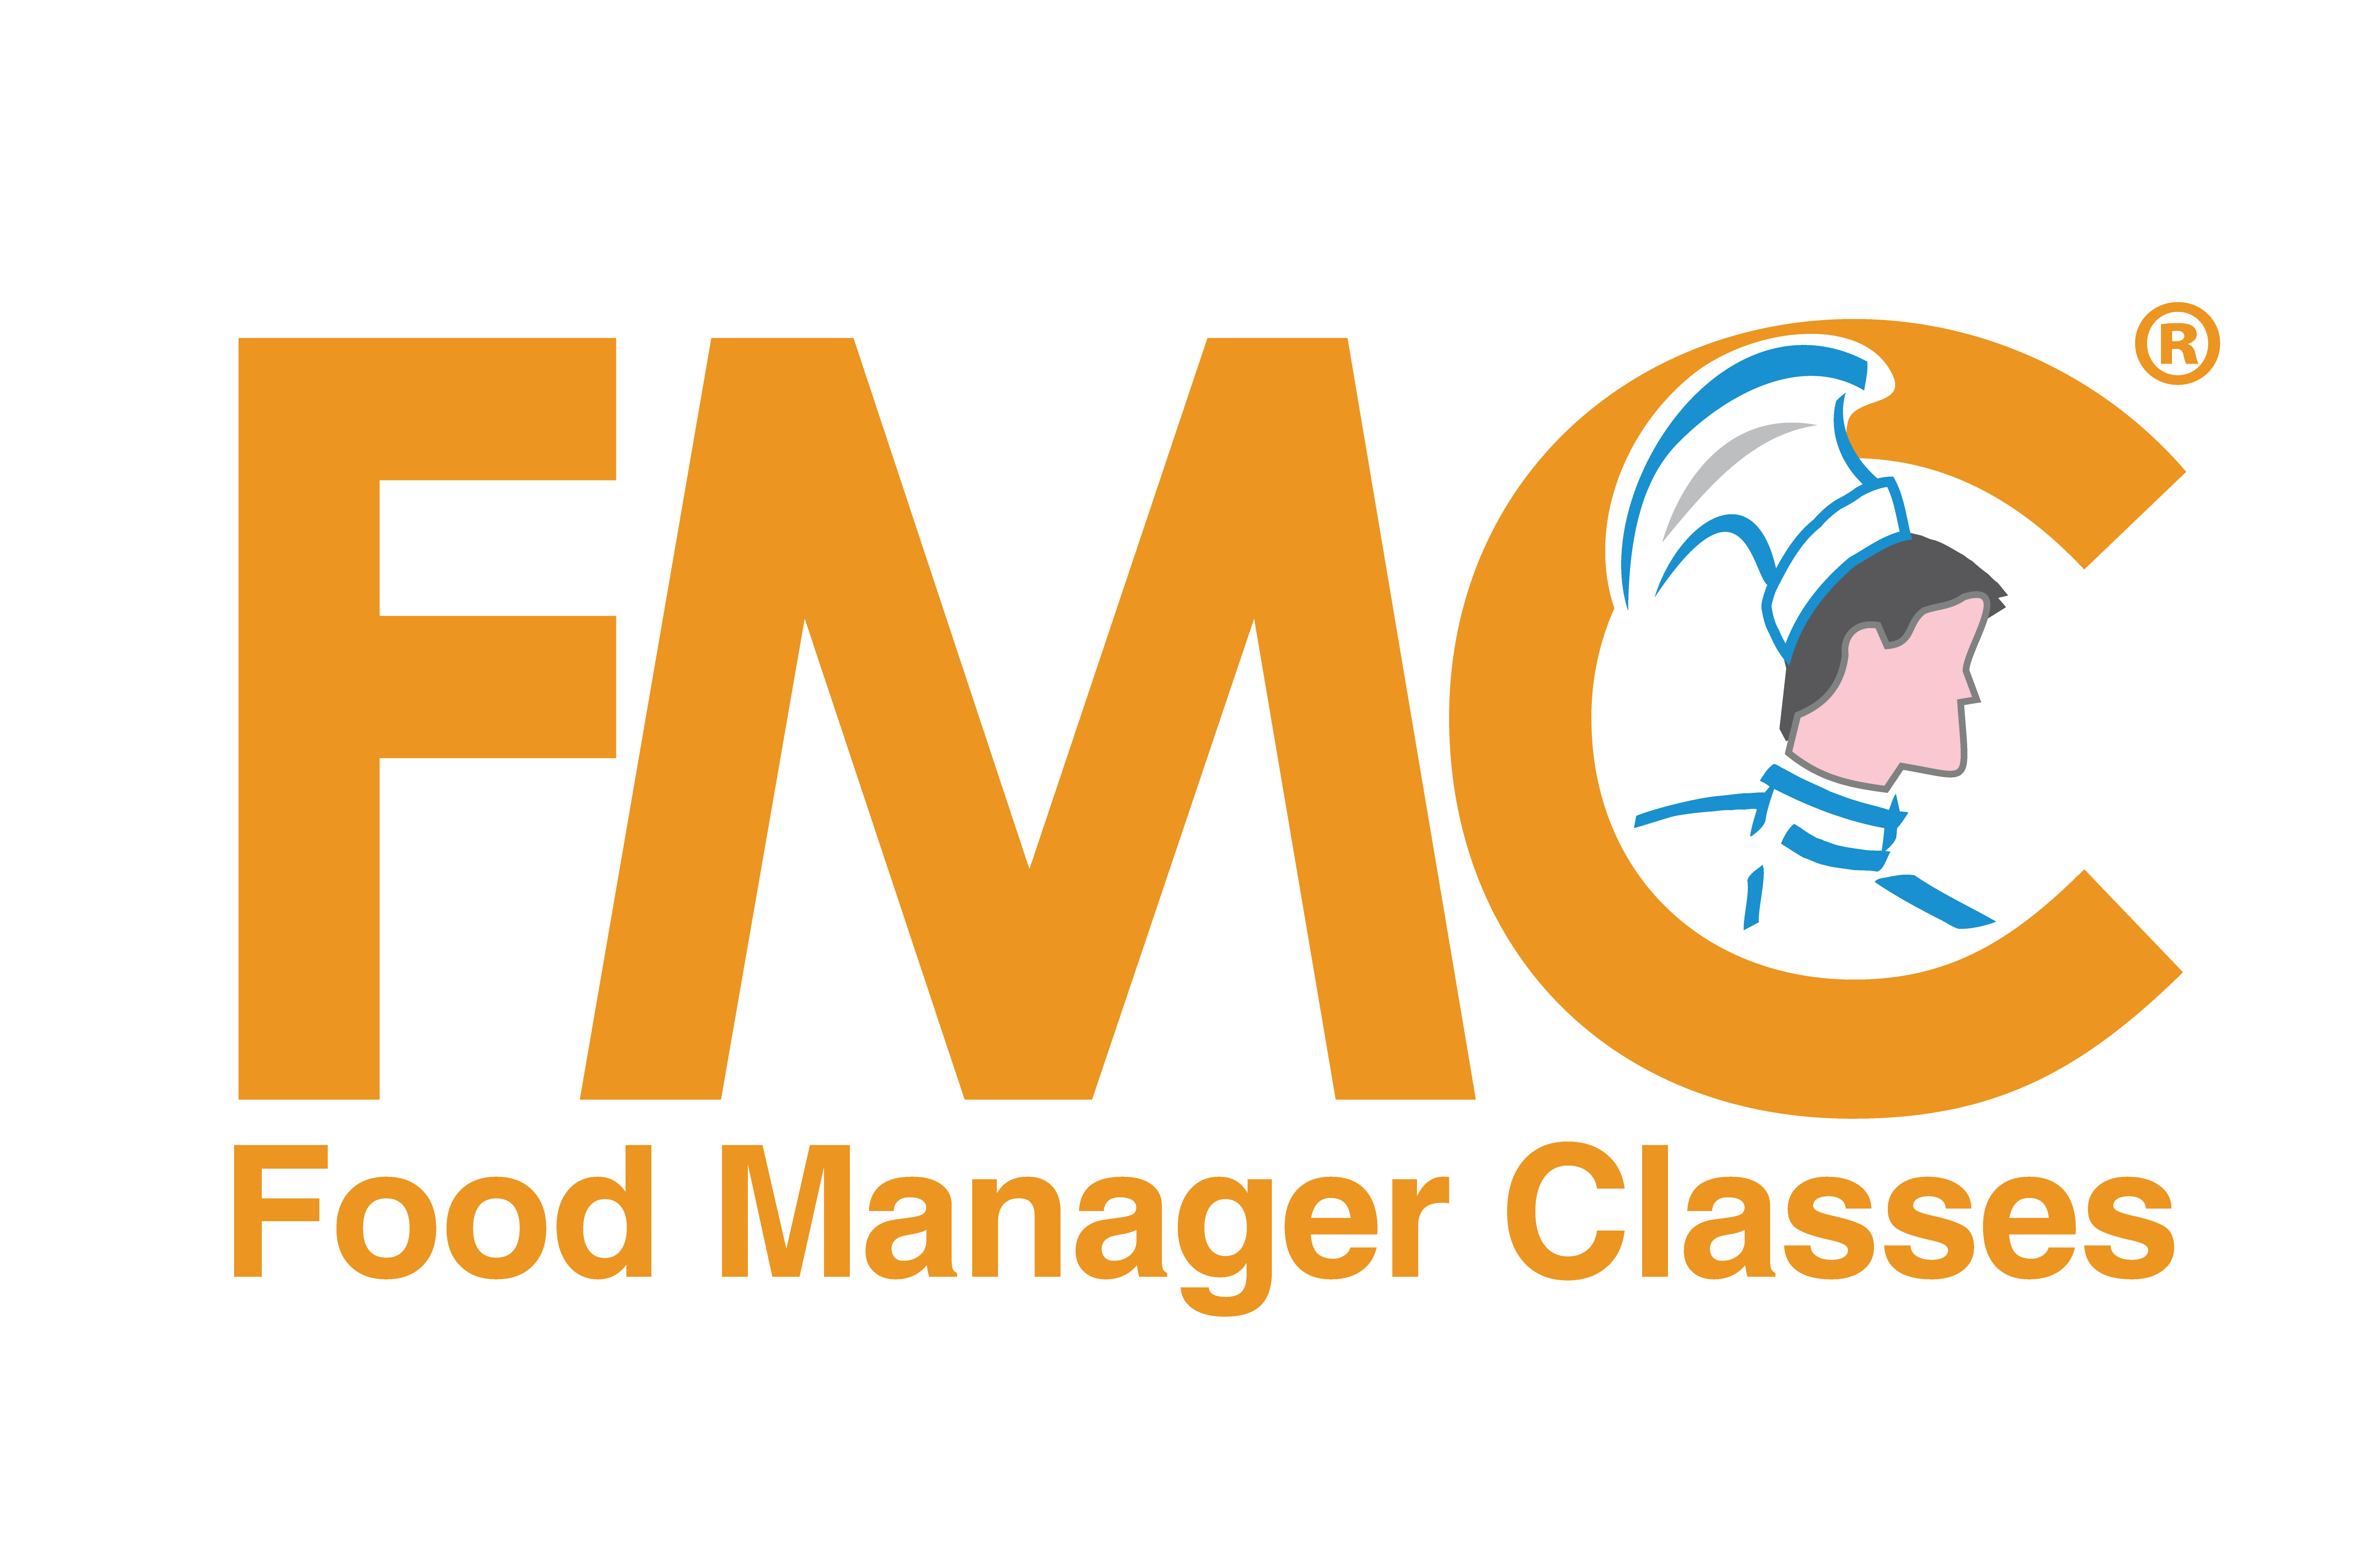 Texas Food Manager Classes